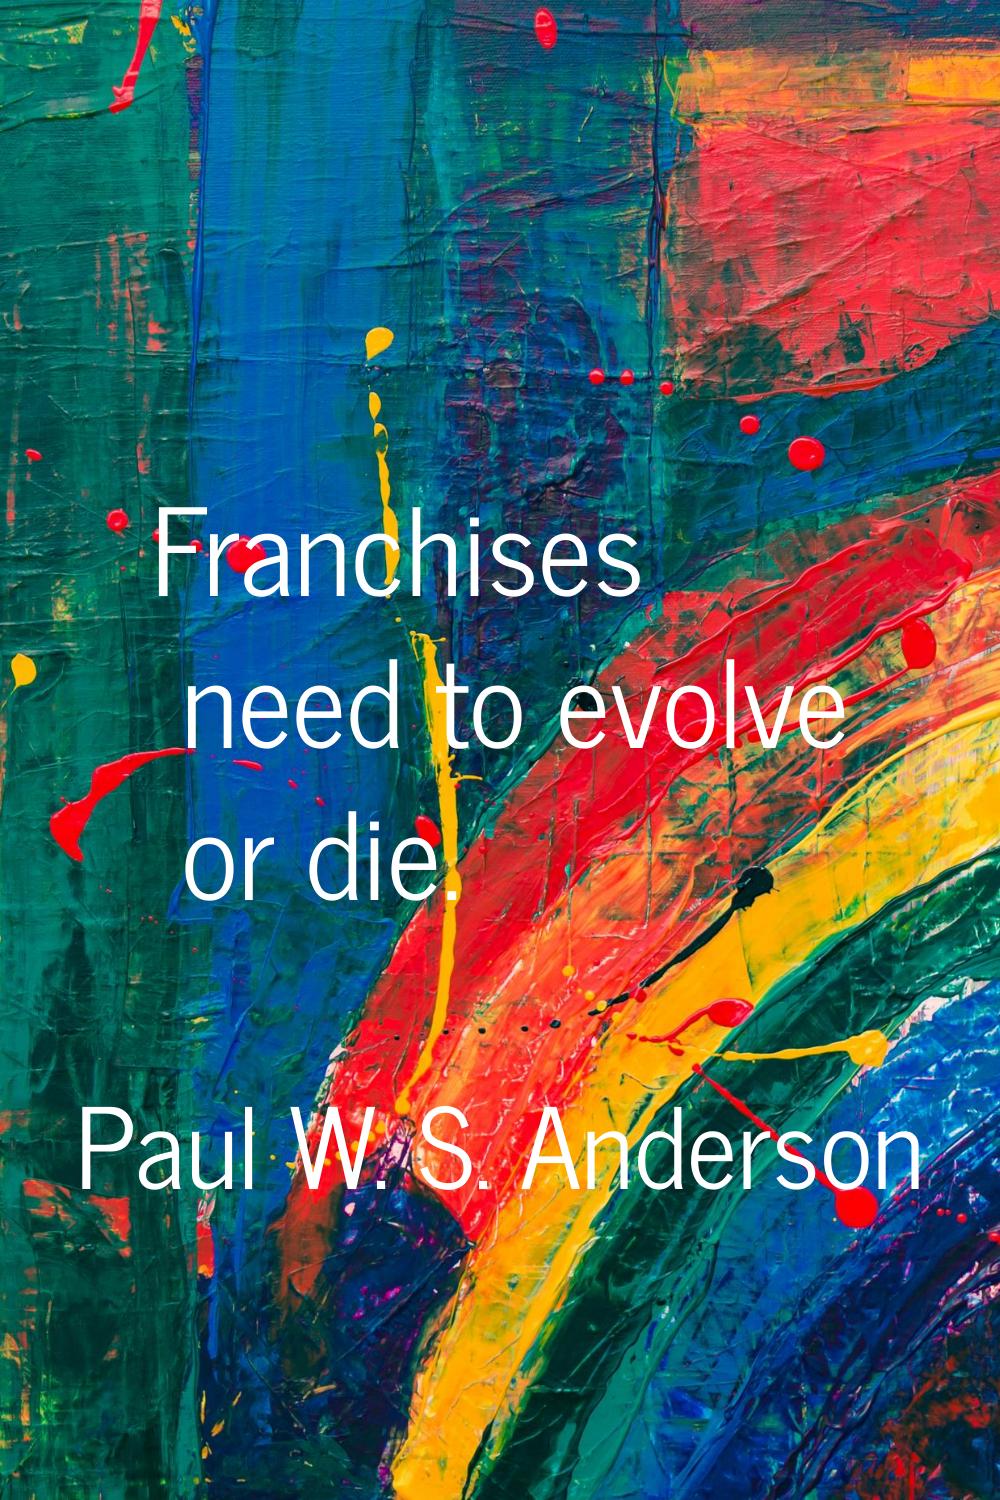 Franchises need to evolve or die.